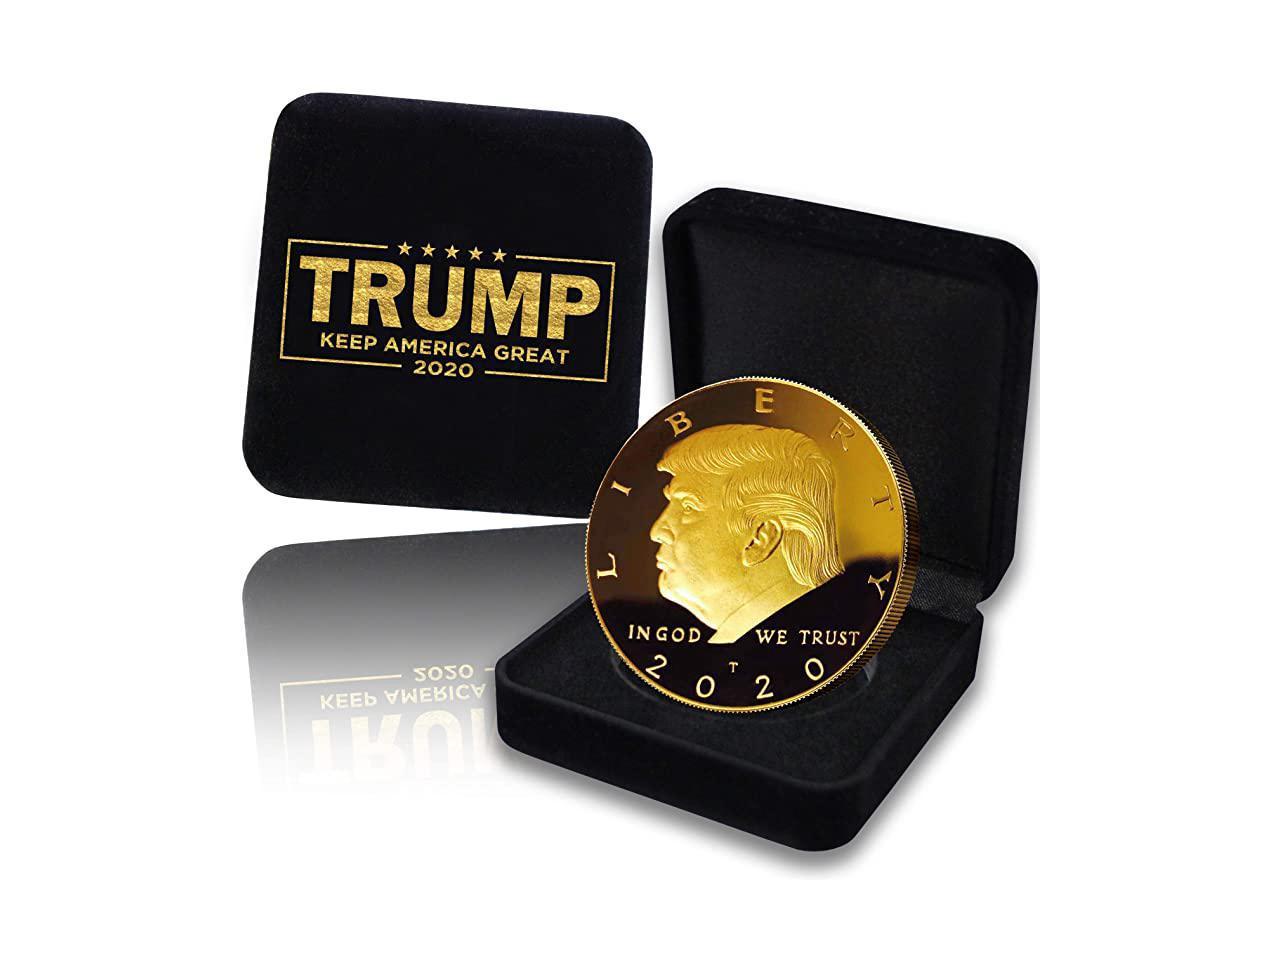 2pcs Donald J Trump 2020 Keep America Great Challenge Coins Gold Plated KAG 